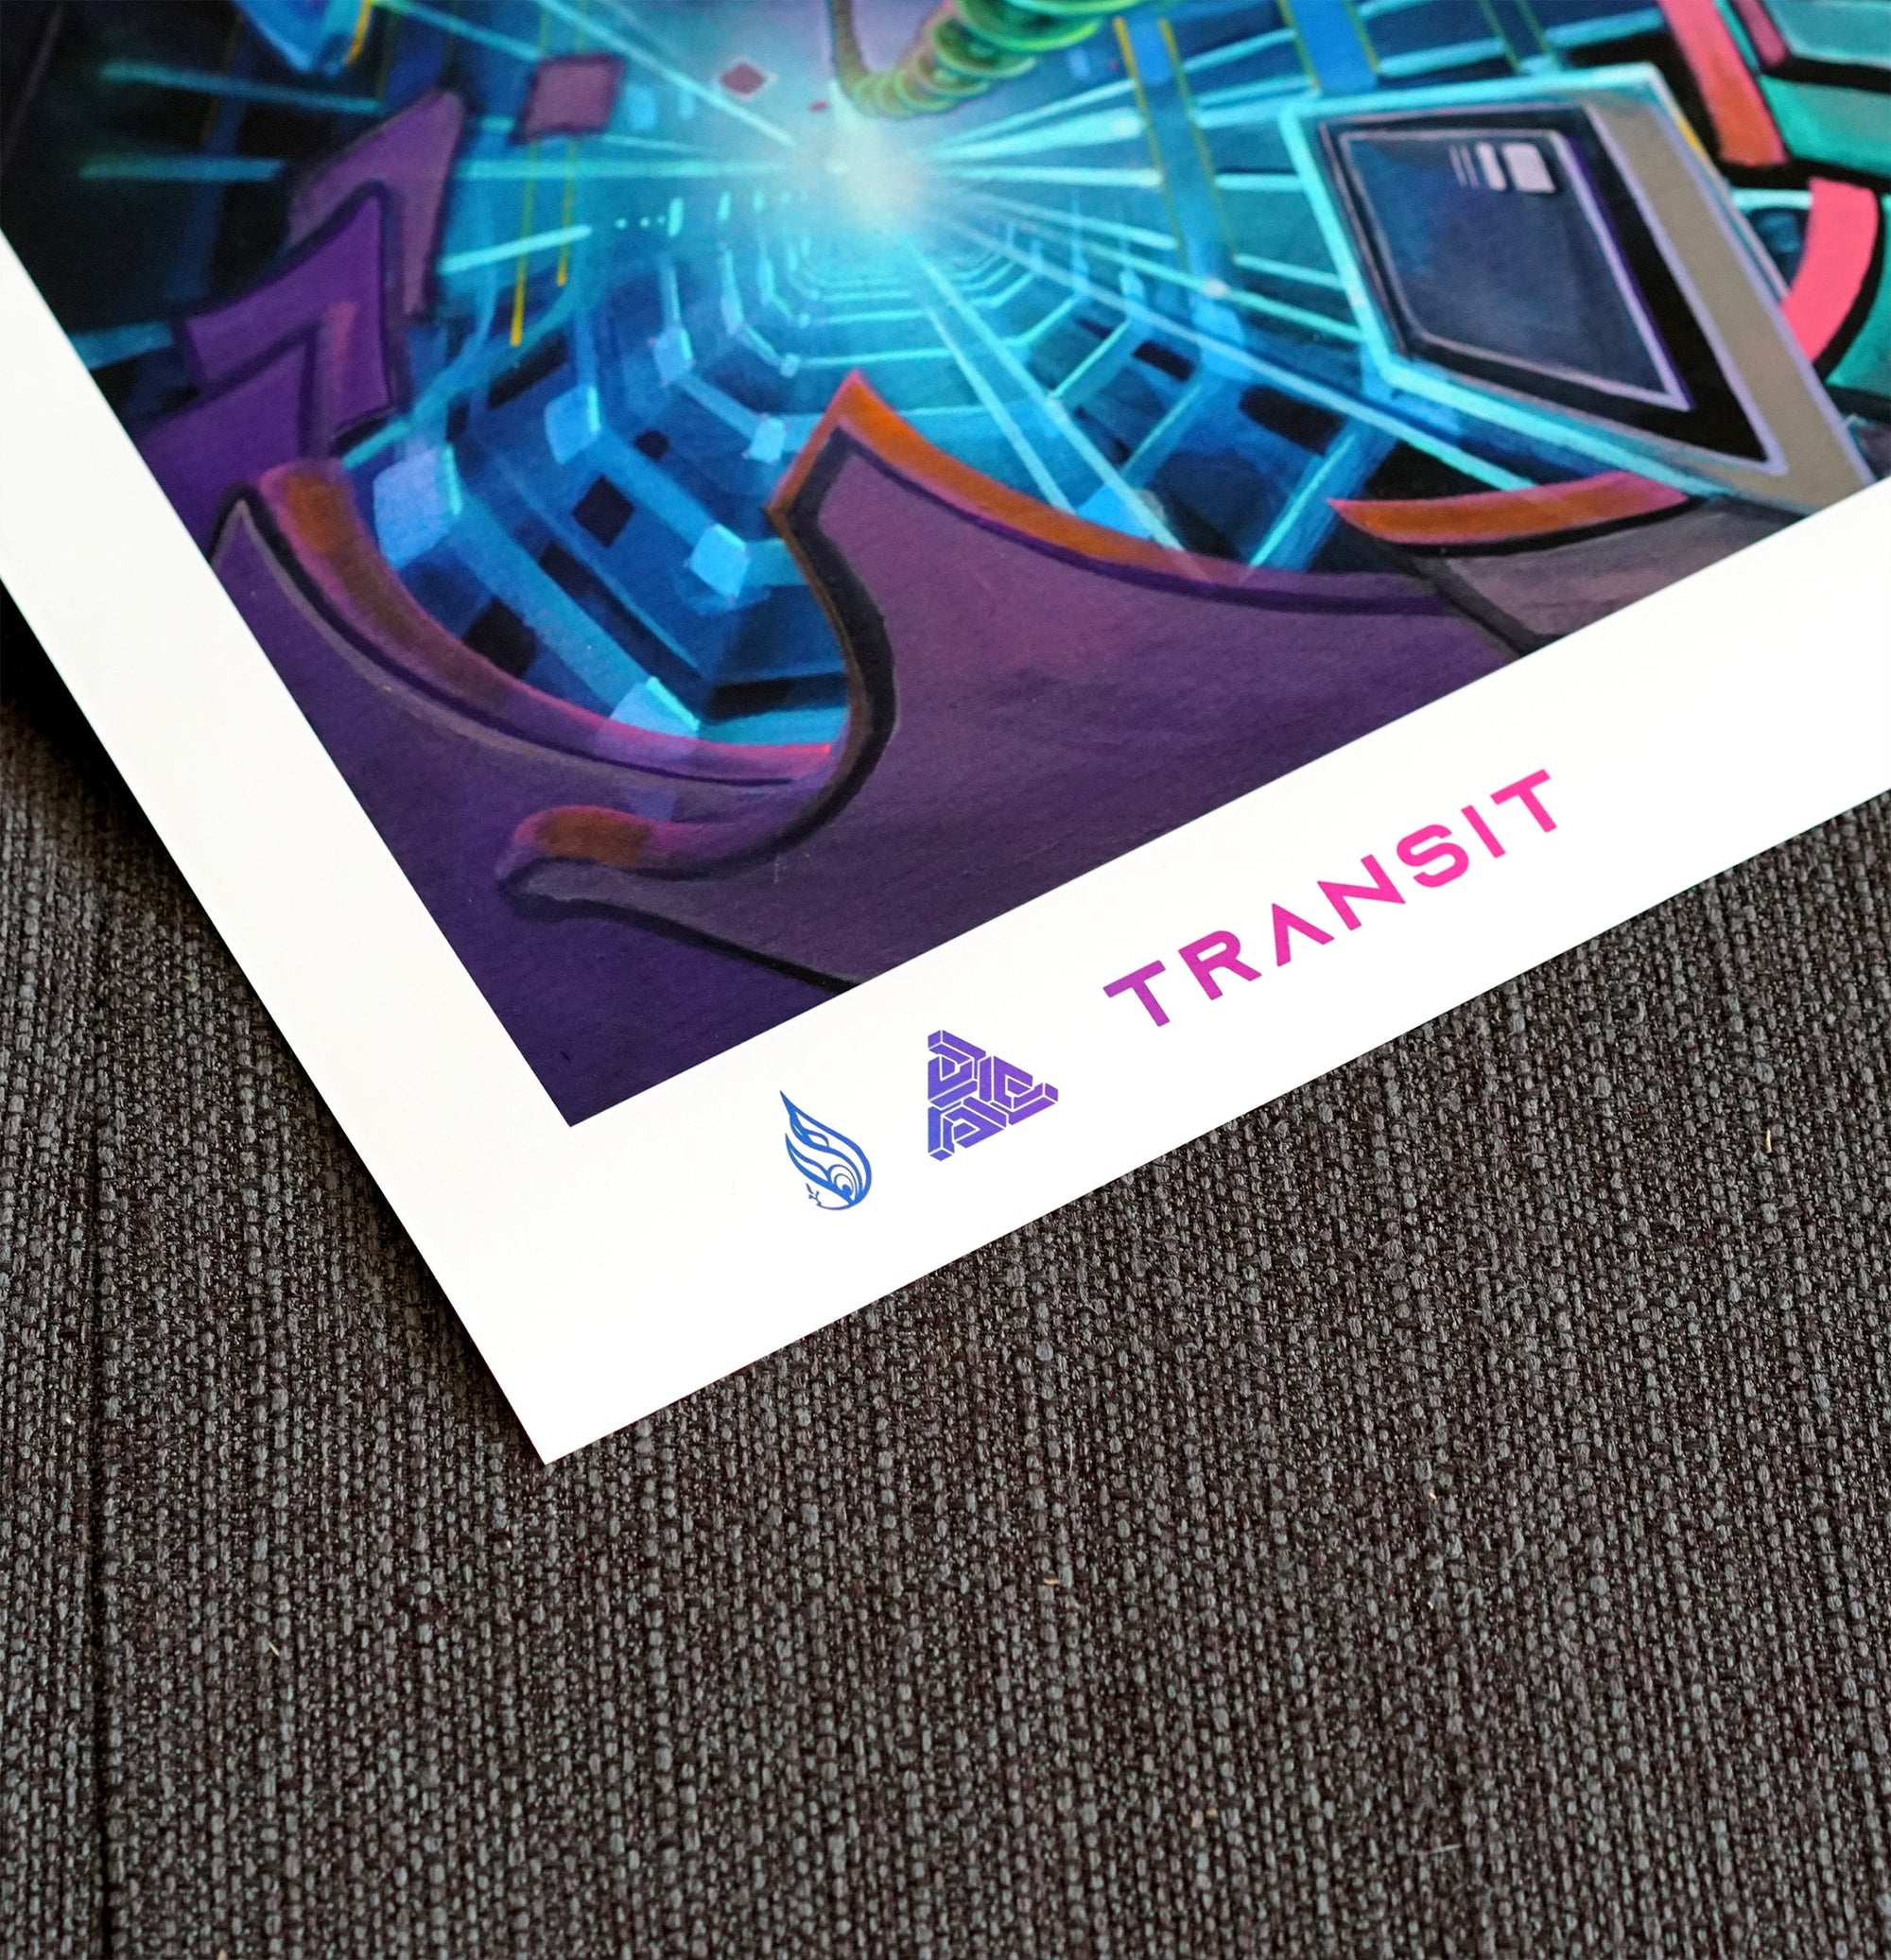 Transit Signed Print by Jake Amason x Stephen Kruse x Seth McMahon x Peter Westermann  - 72 Hour Release